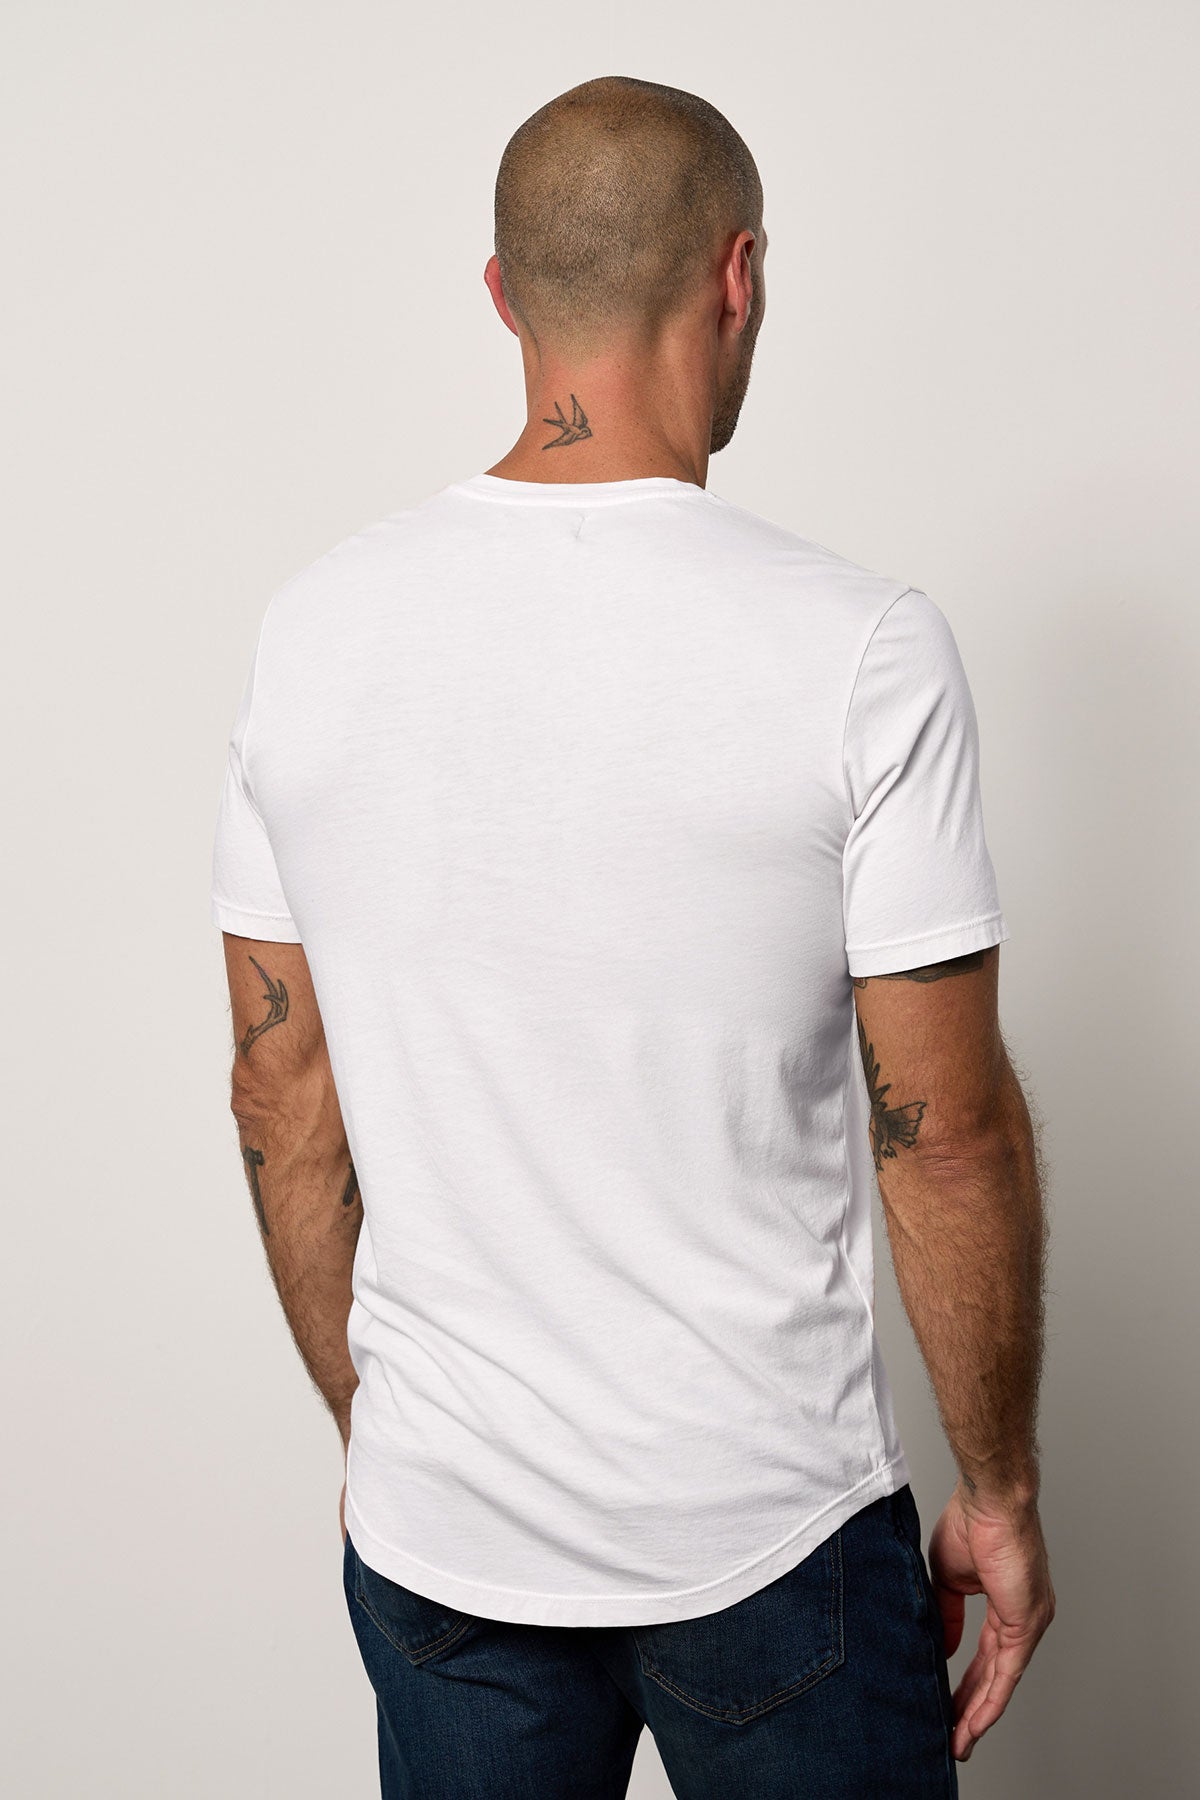 Man standing with his back to the camera, wearing a white Velvet by Graham & Spencer Fulton henley tee with a curved hemline, revealing tattoos on his arms and neck.-36640141181121